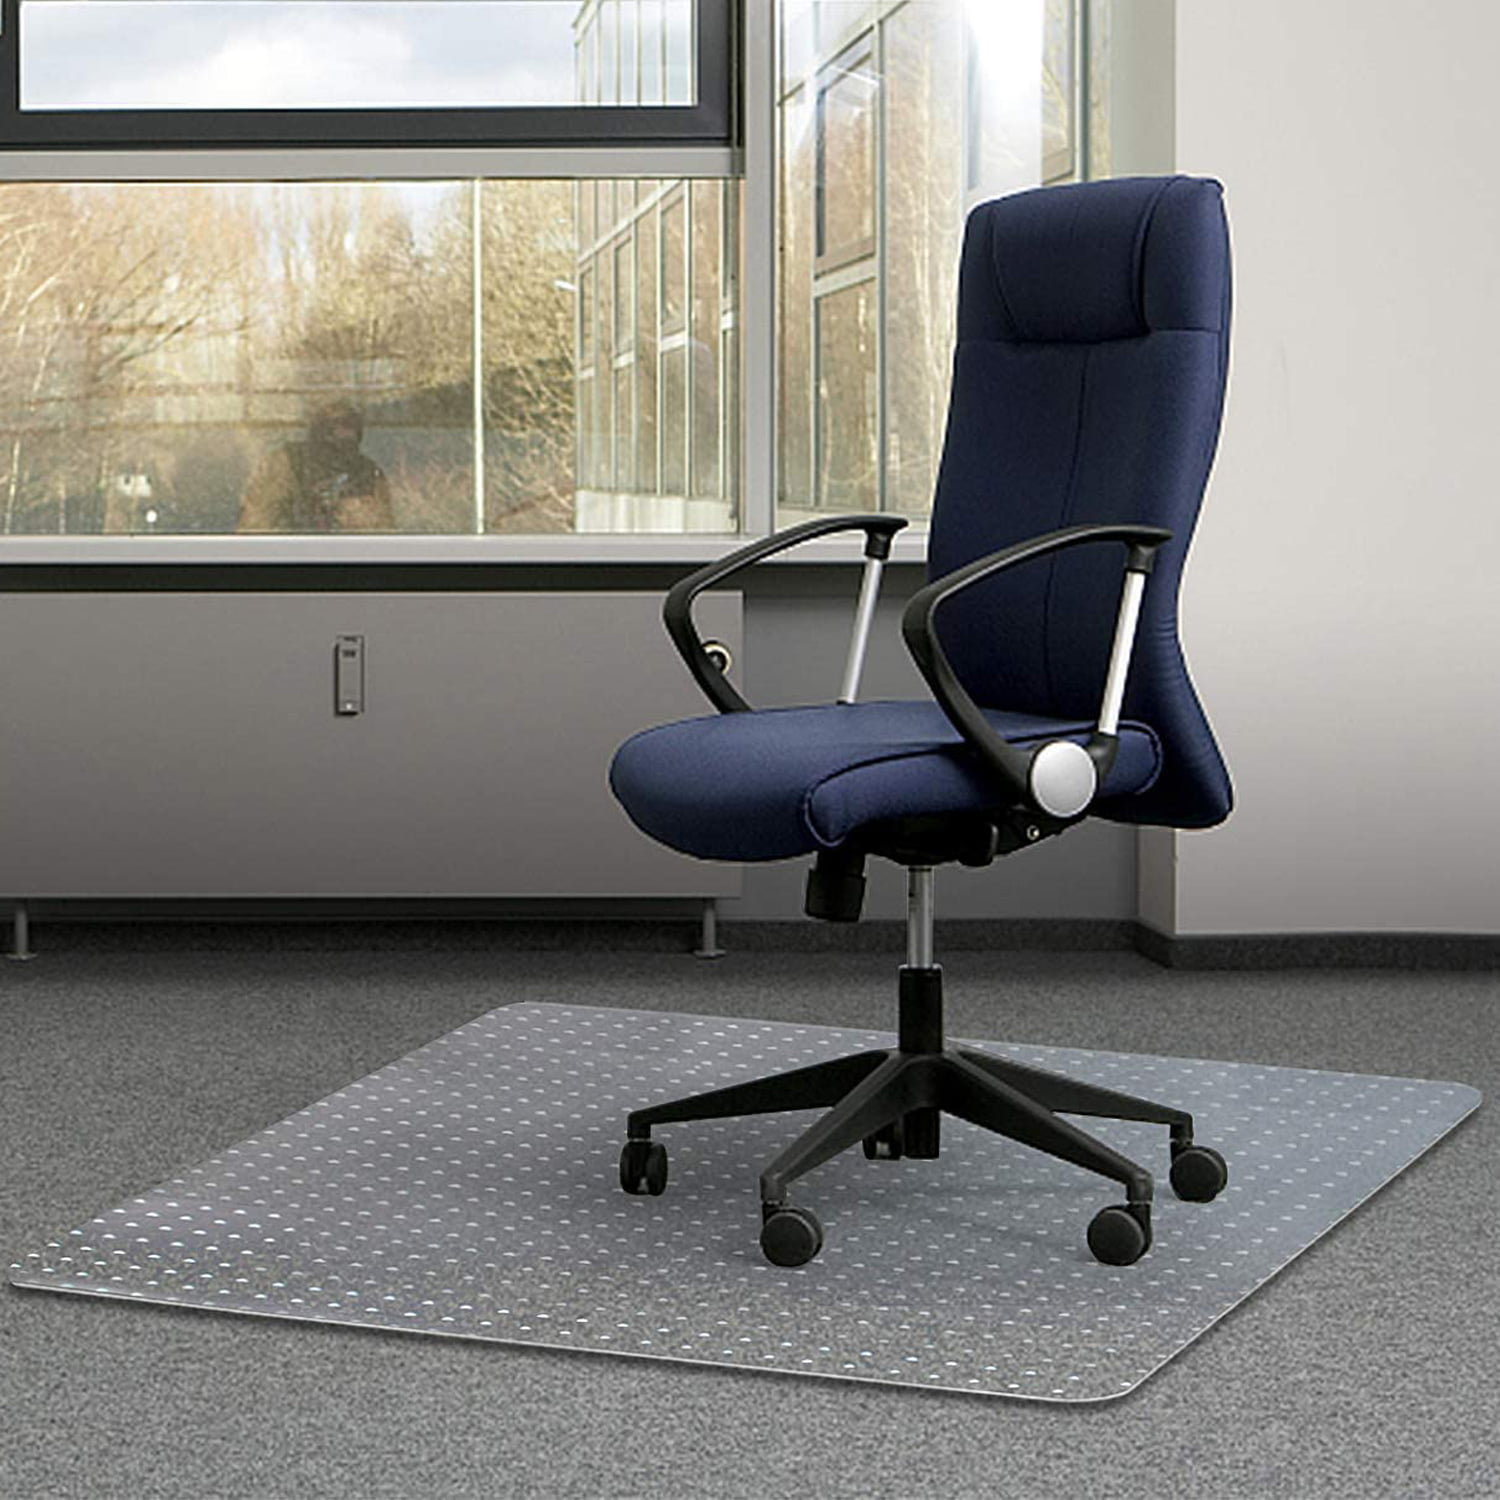 Office Chair Mat Protector for Carpeted Floors 2.0mm Thick Easy Flat and Glide 48X36 Rectangle Studded Home Office Desk Chair Mats for Low and Medium Pile Carpets Transparent and Sturdy 